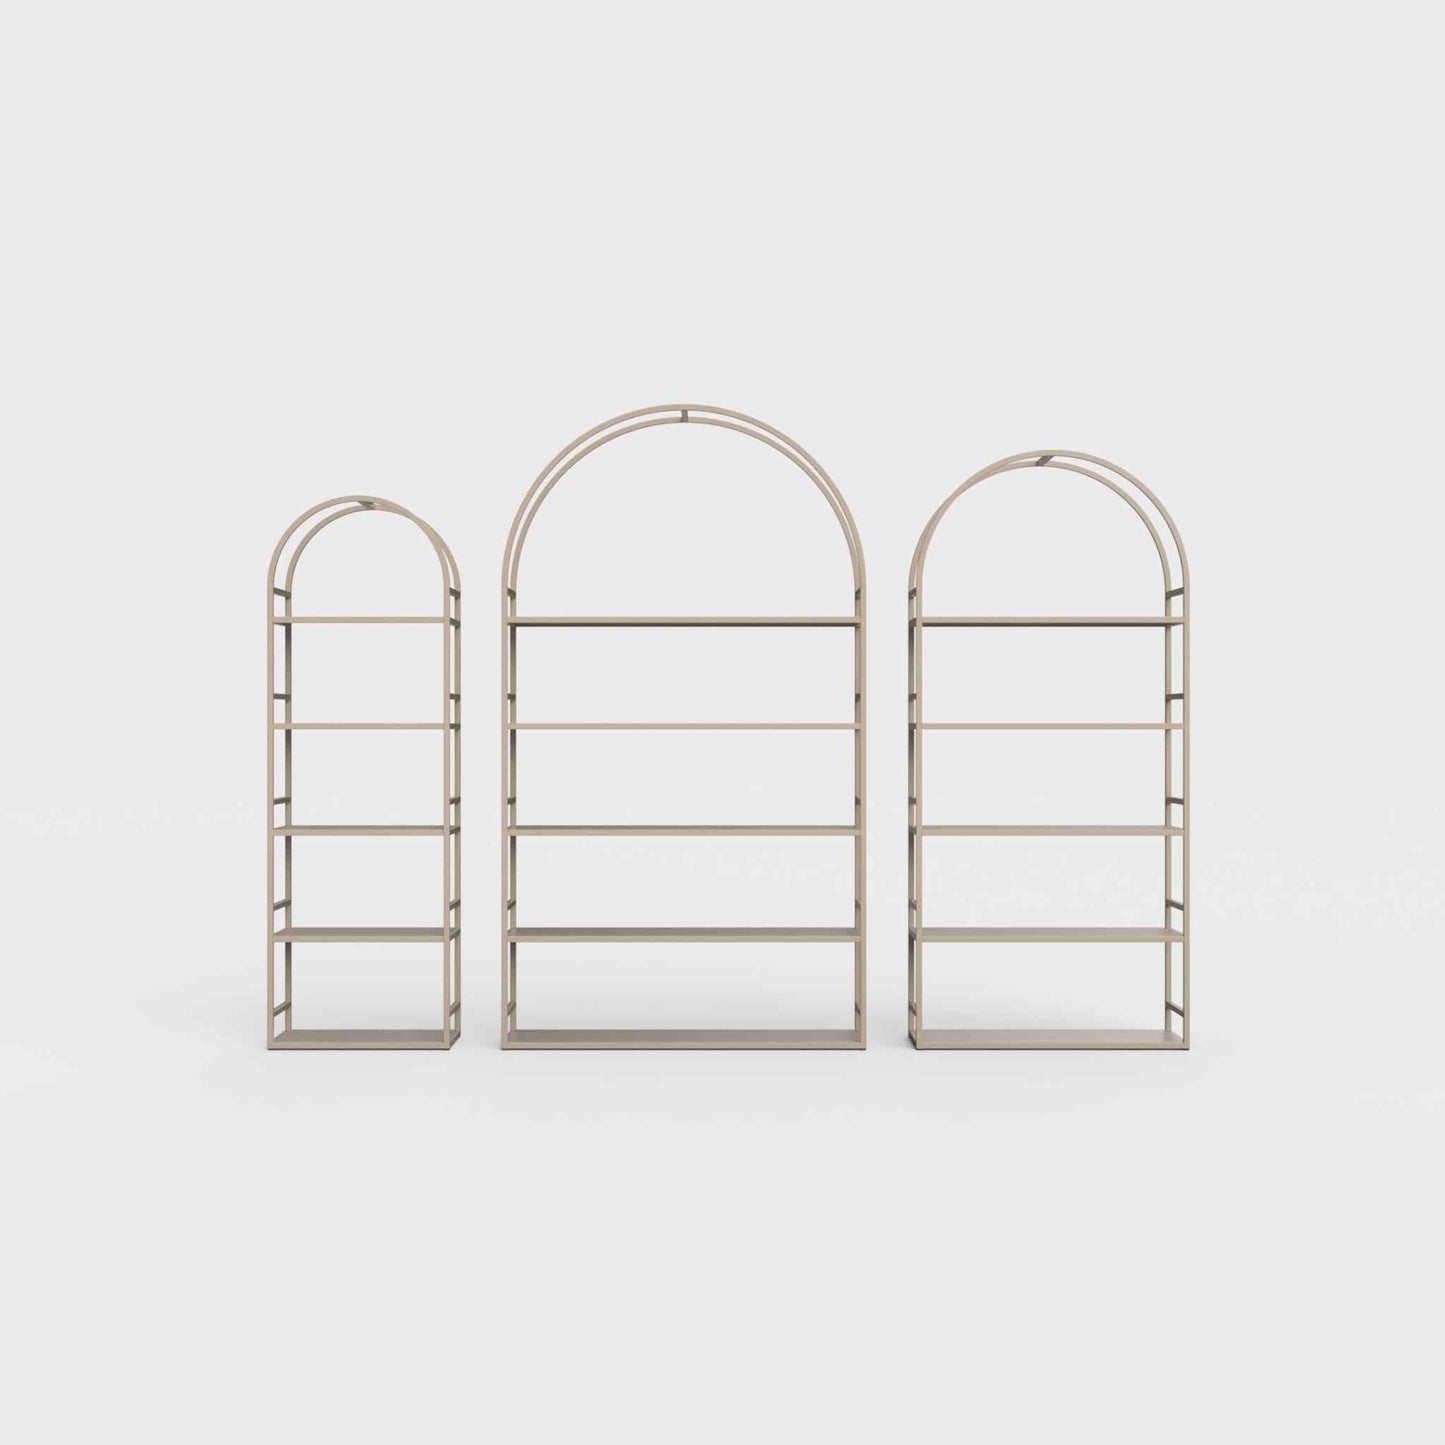 Arched bookcase Arkada, available in Switzerland through ÉTAUDORÉ, made from highest quality powdered coated steel in khaki color